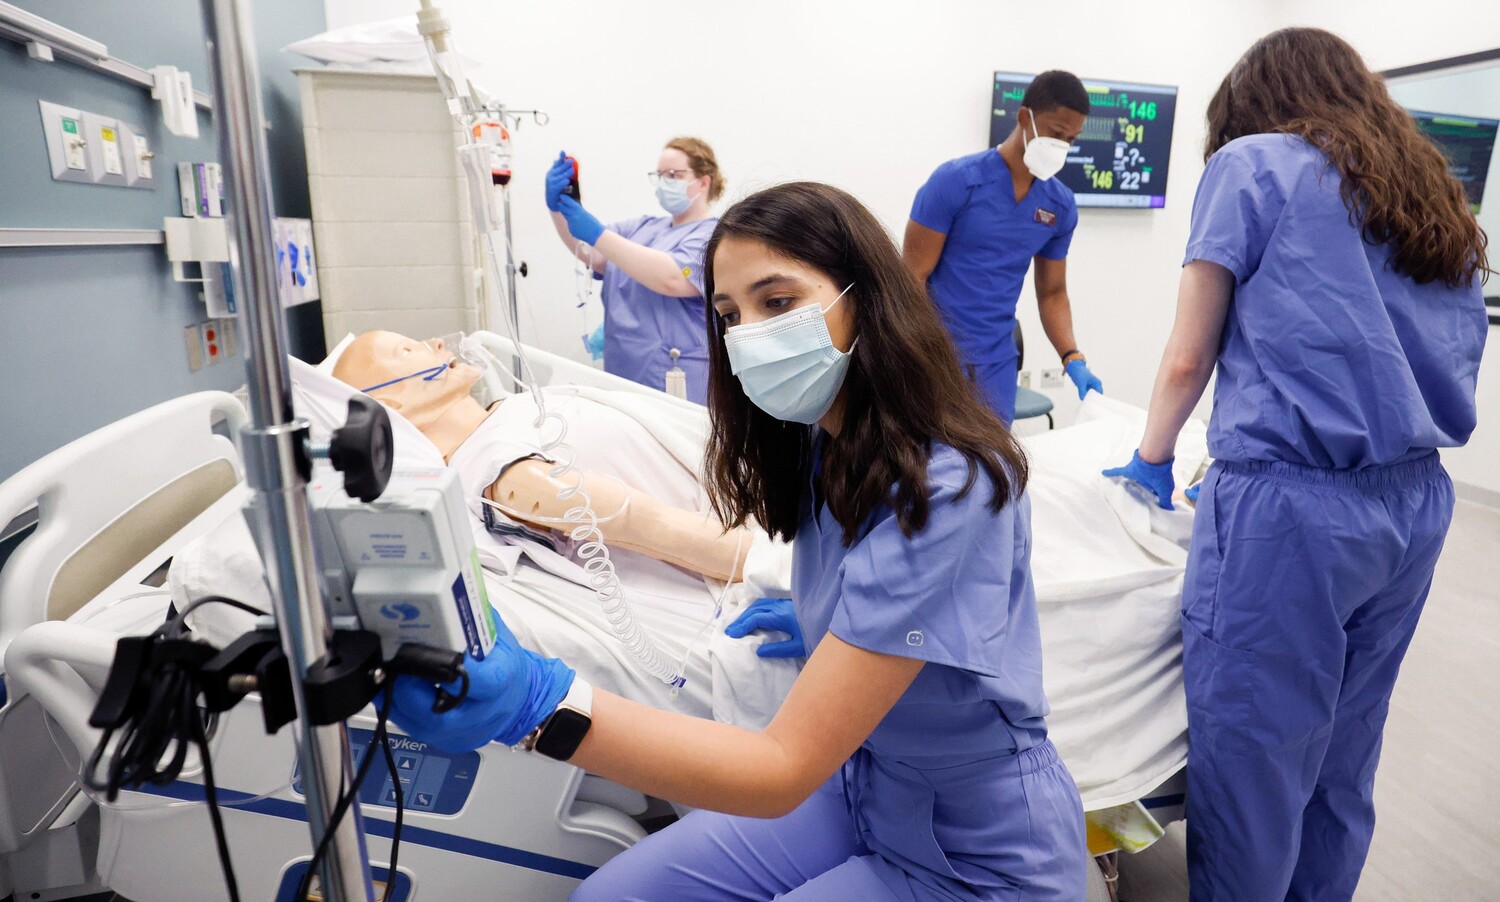 four University of Minnesota Medical School students participate in a patient care simulation exercise